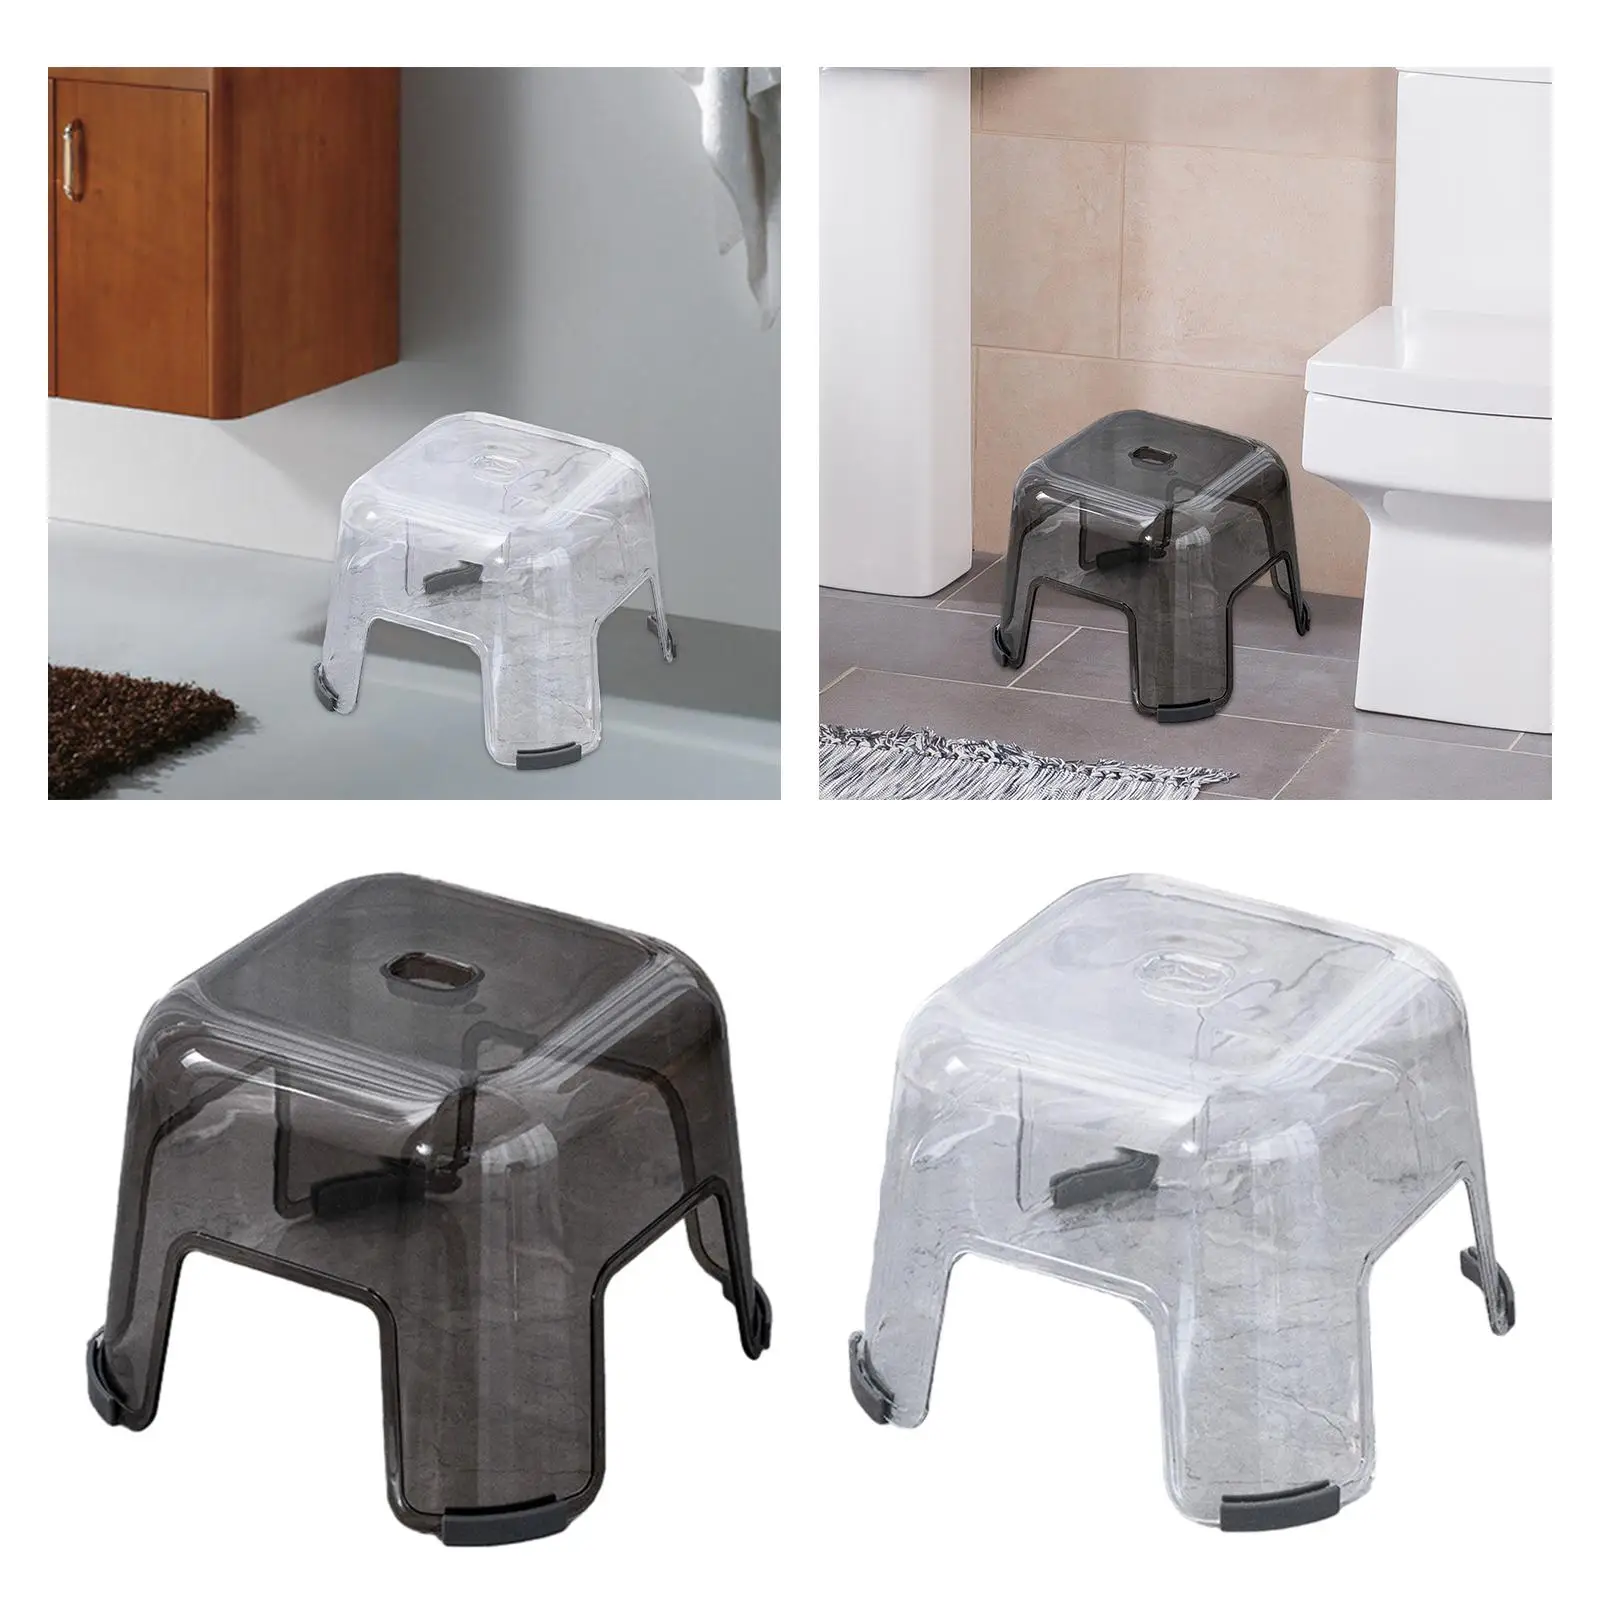 Step Stool Lightweight Portable Portable Furniture Chair Multipurpose Bath Lower Stool Change Shoe Stool for Living Room Bedside